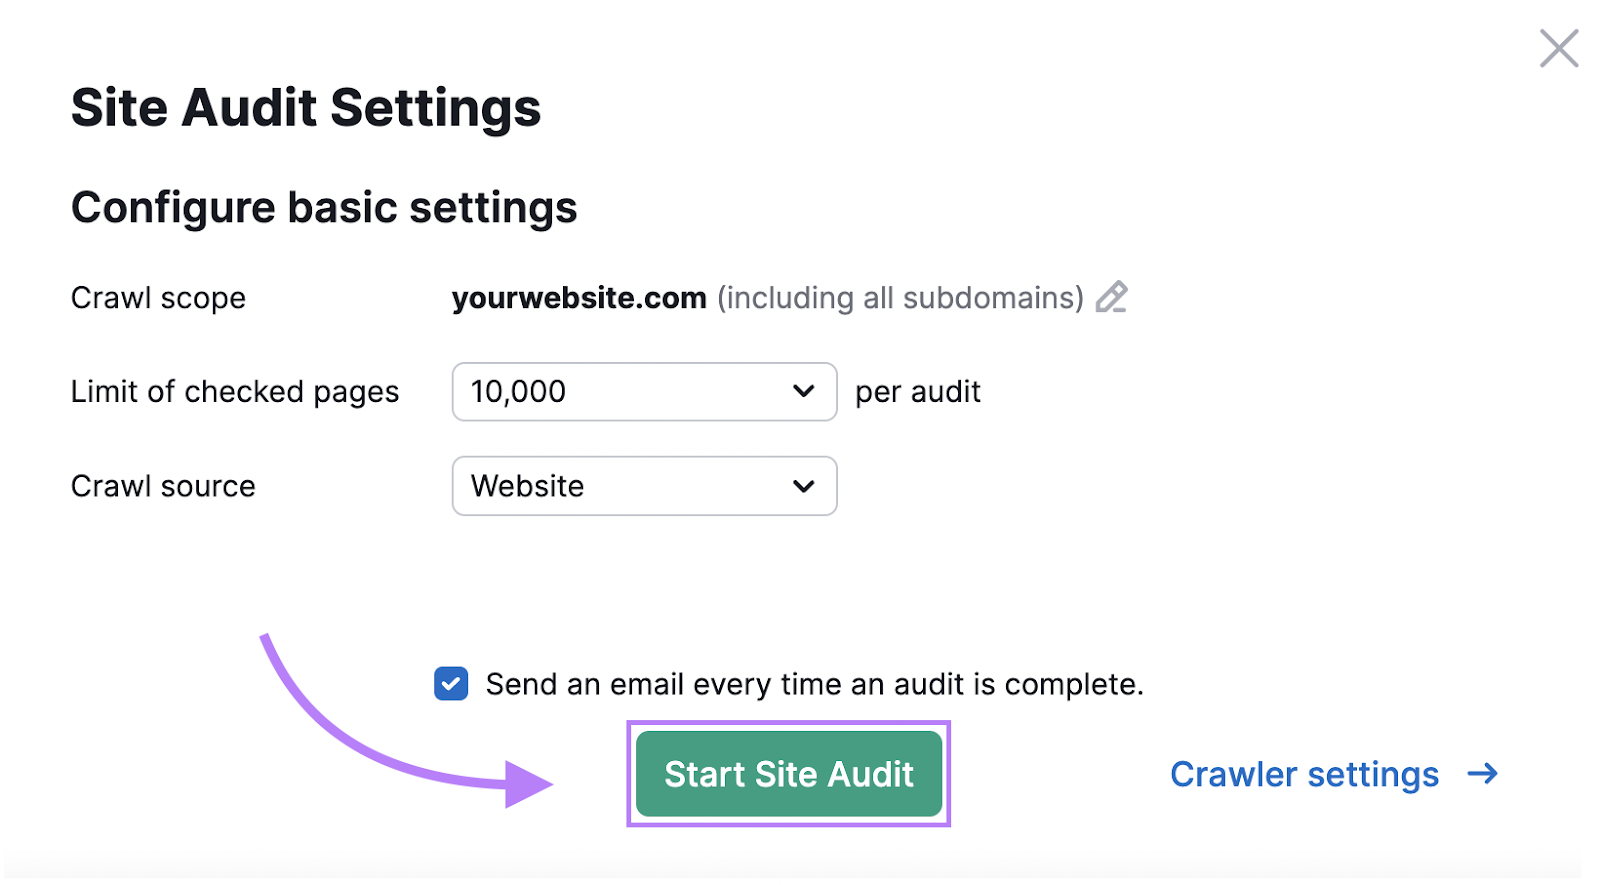 "Start Site Audit" button selected at the bottom of "Site Audit Settings" window